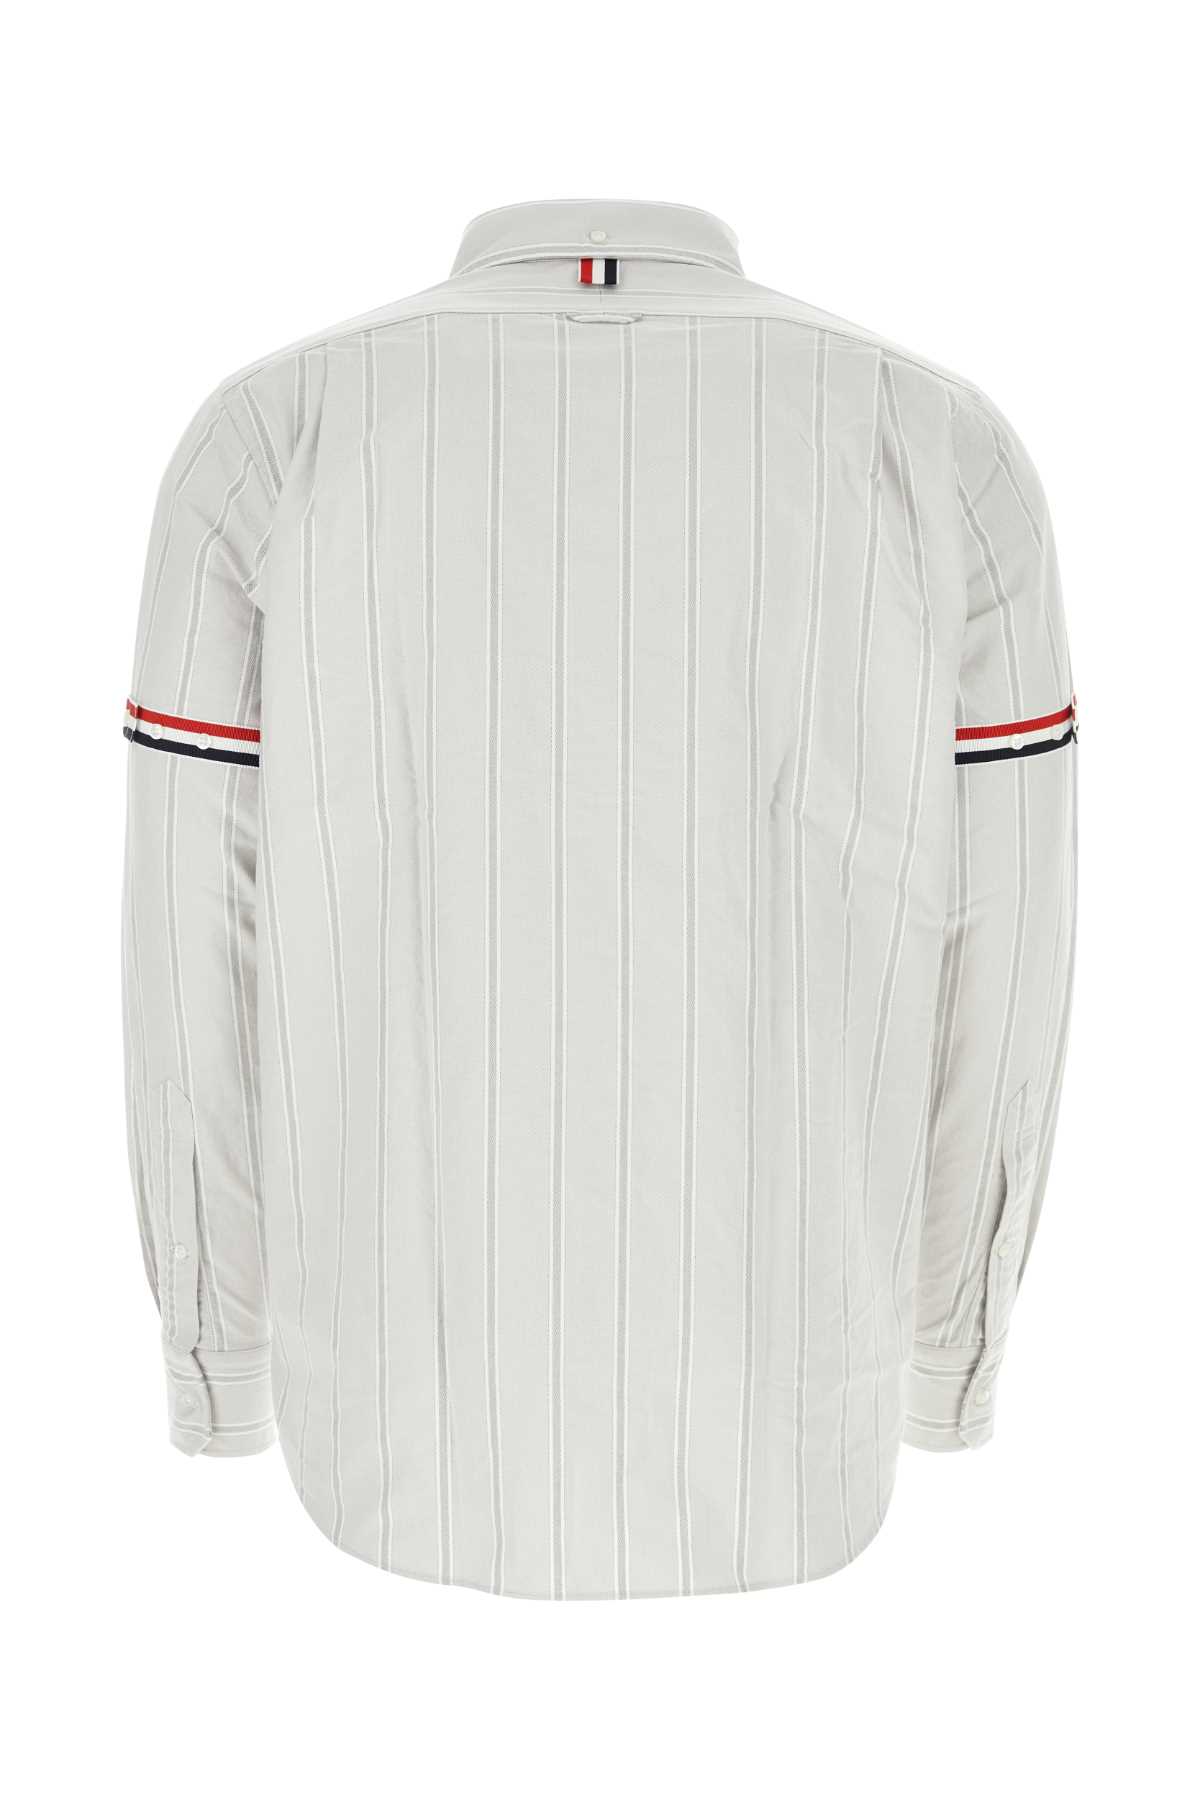 THOM BROWNE EMBROIDERED OXFORD SHIRT